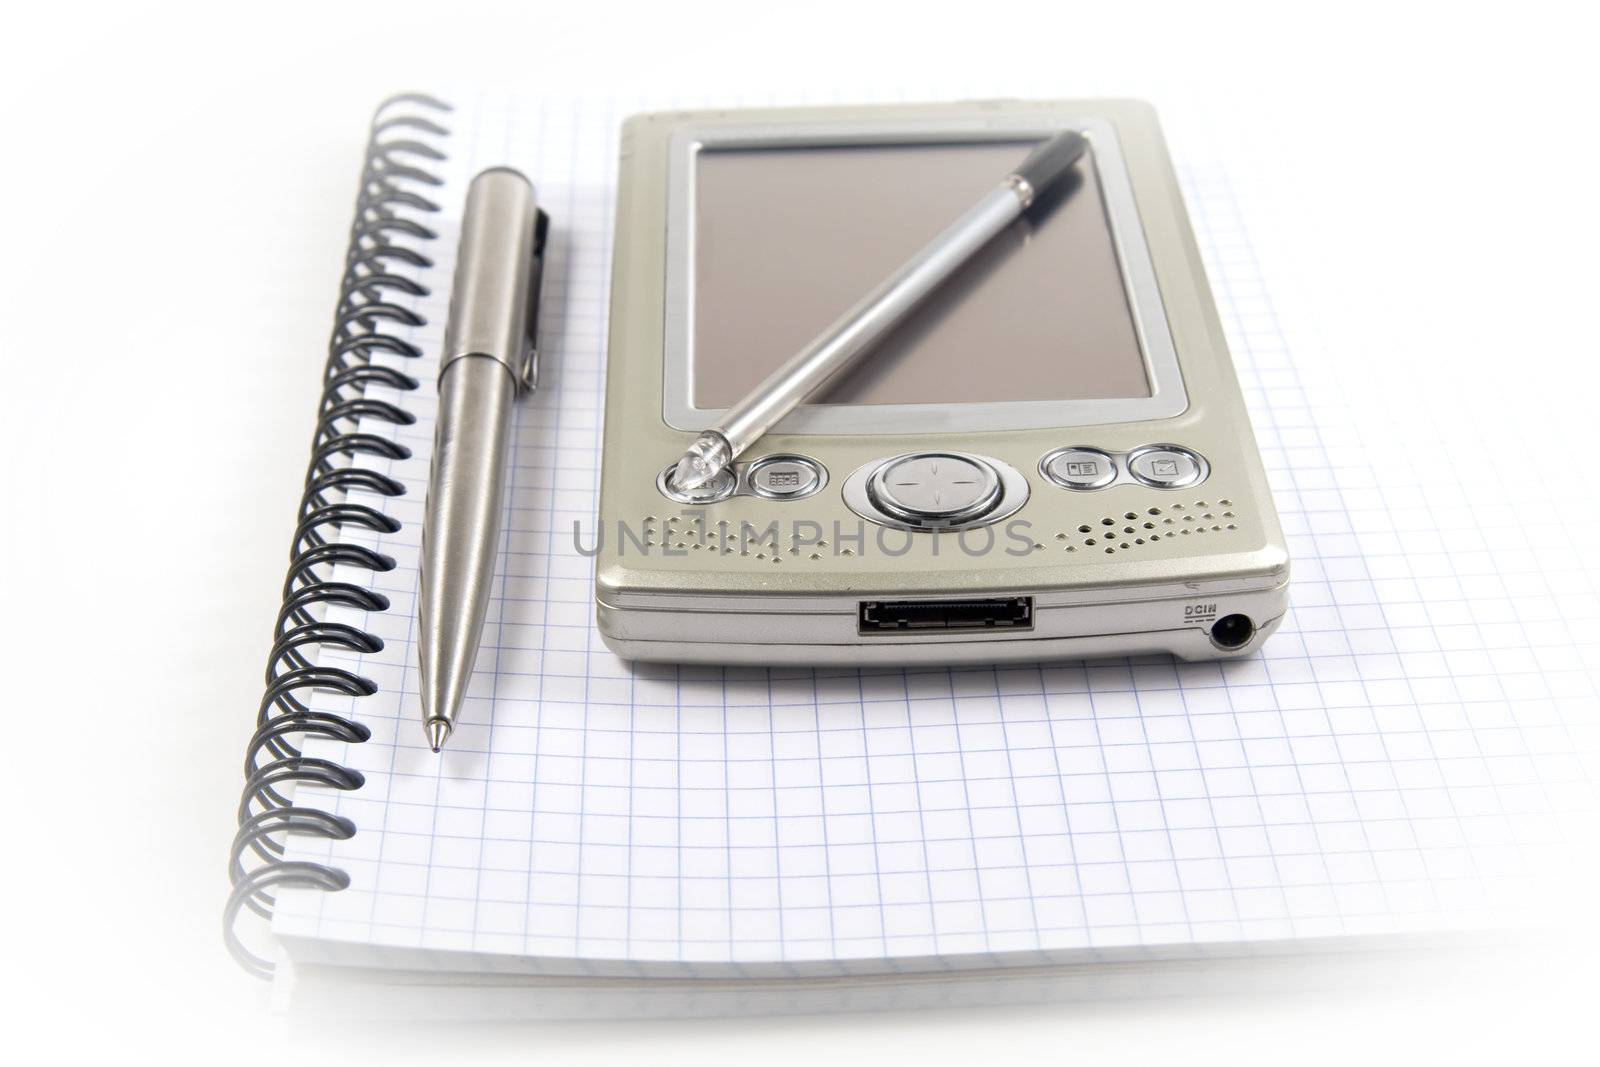 Vignetting image of pen and PDA on spiral notebook by serpl